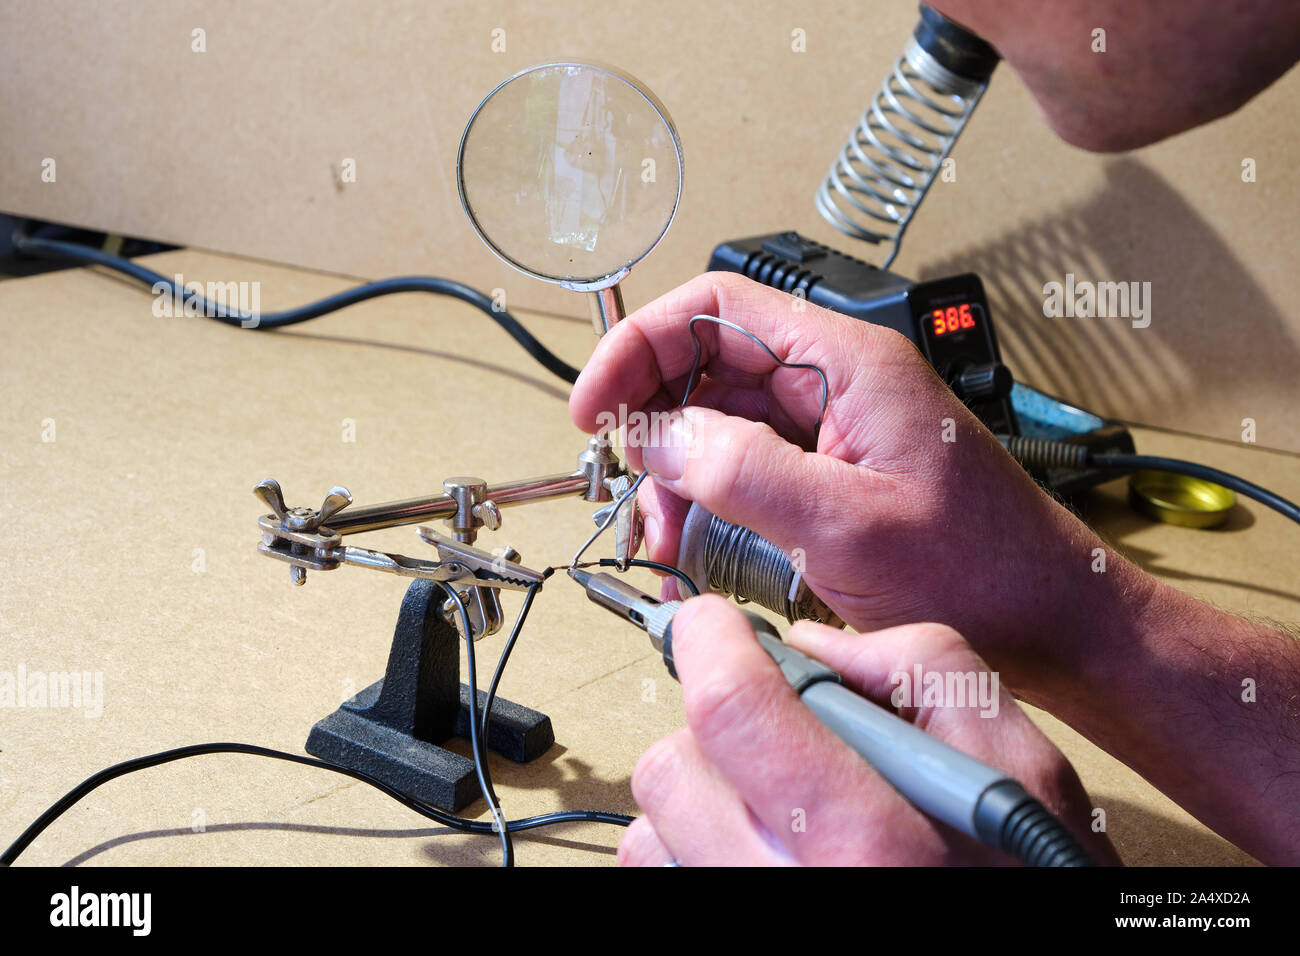 Close up of a man soldering wiring using a soldering station soldering iron and helping hands clips in a DIY environment Stock Photo